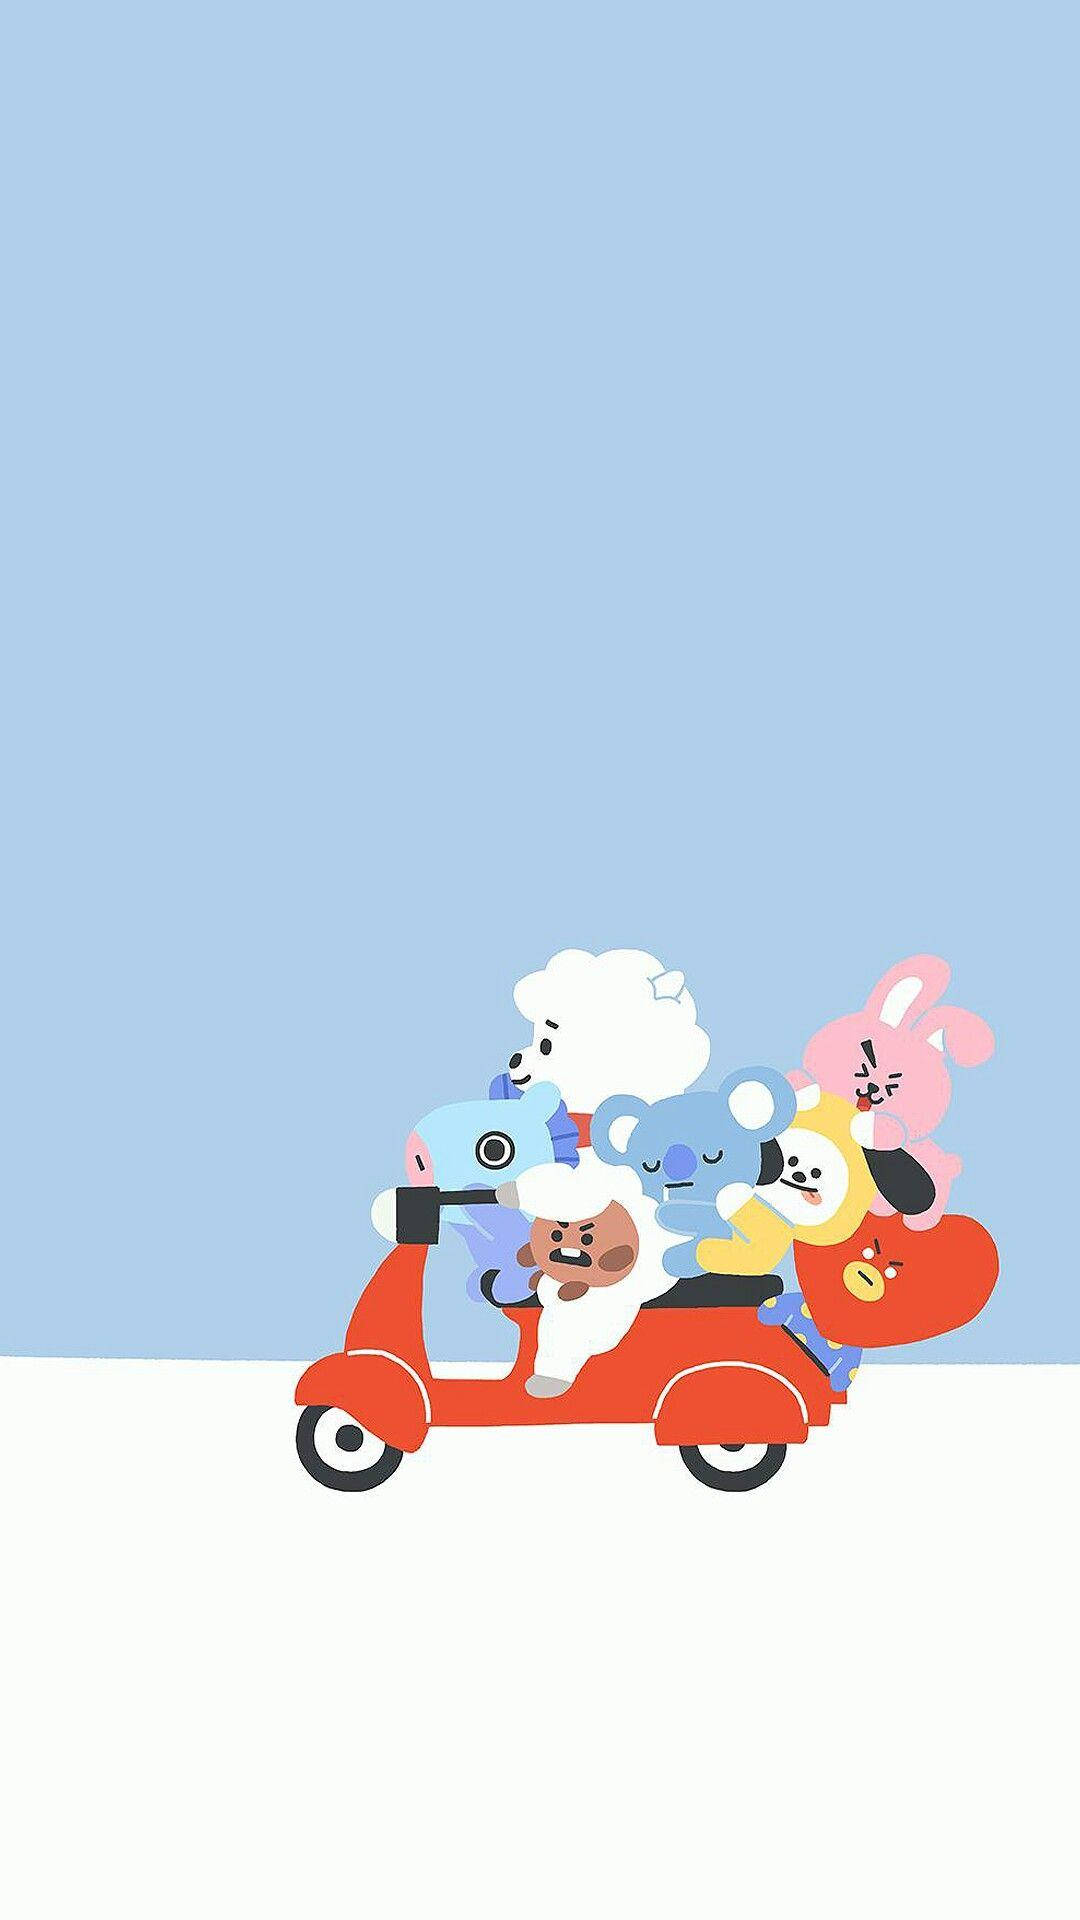 Cooky Bt21 In Scooter With Friends